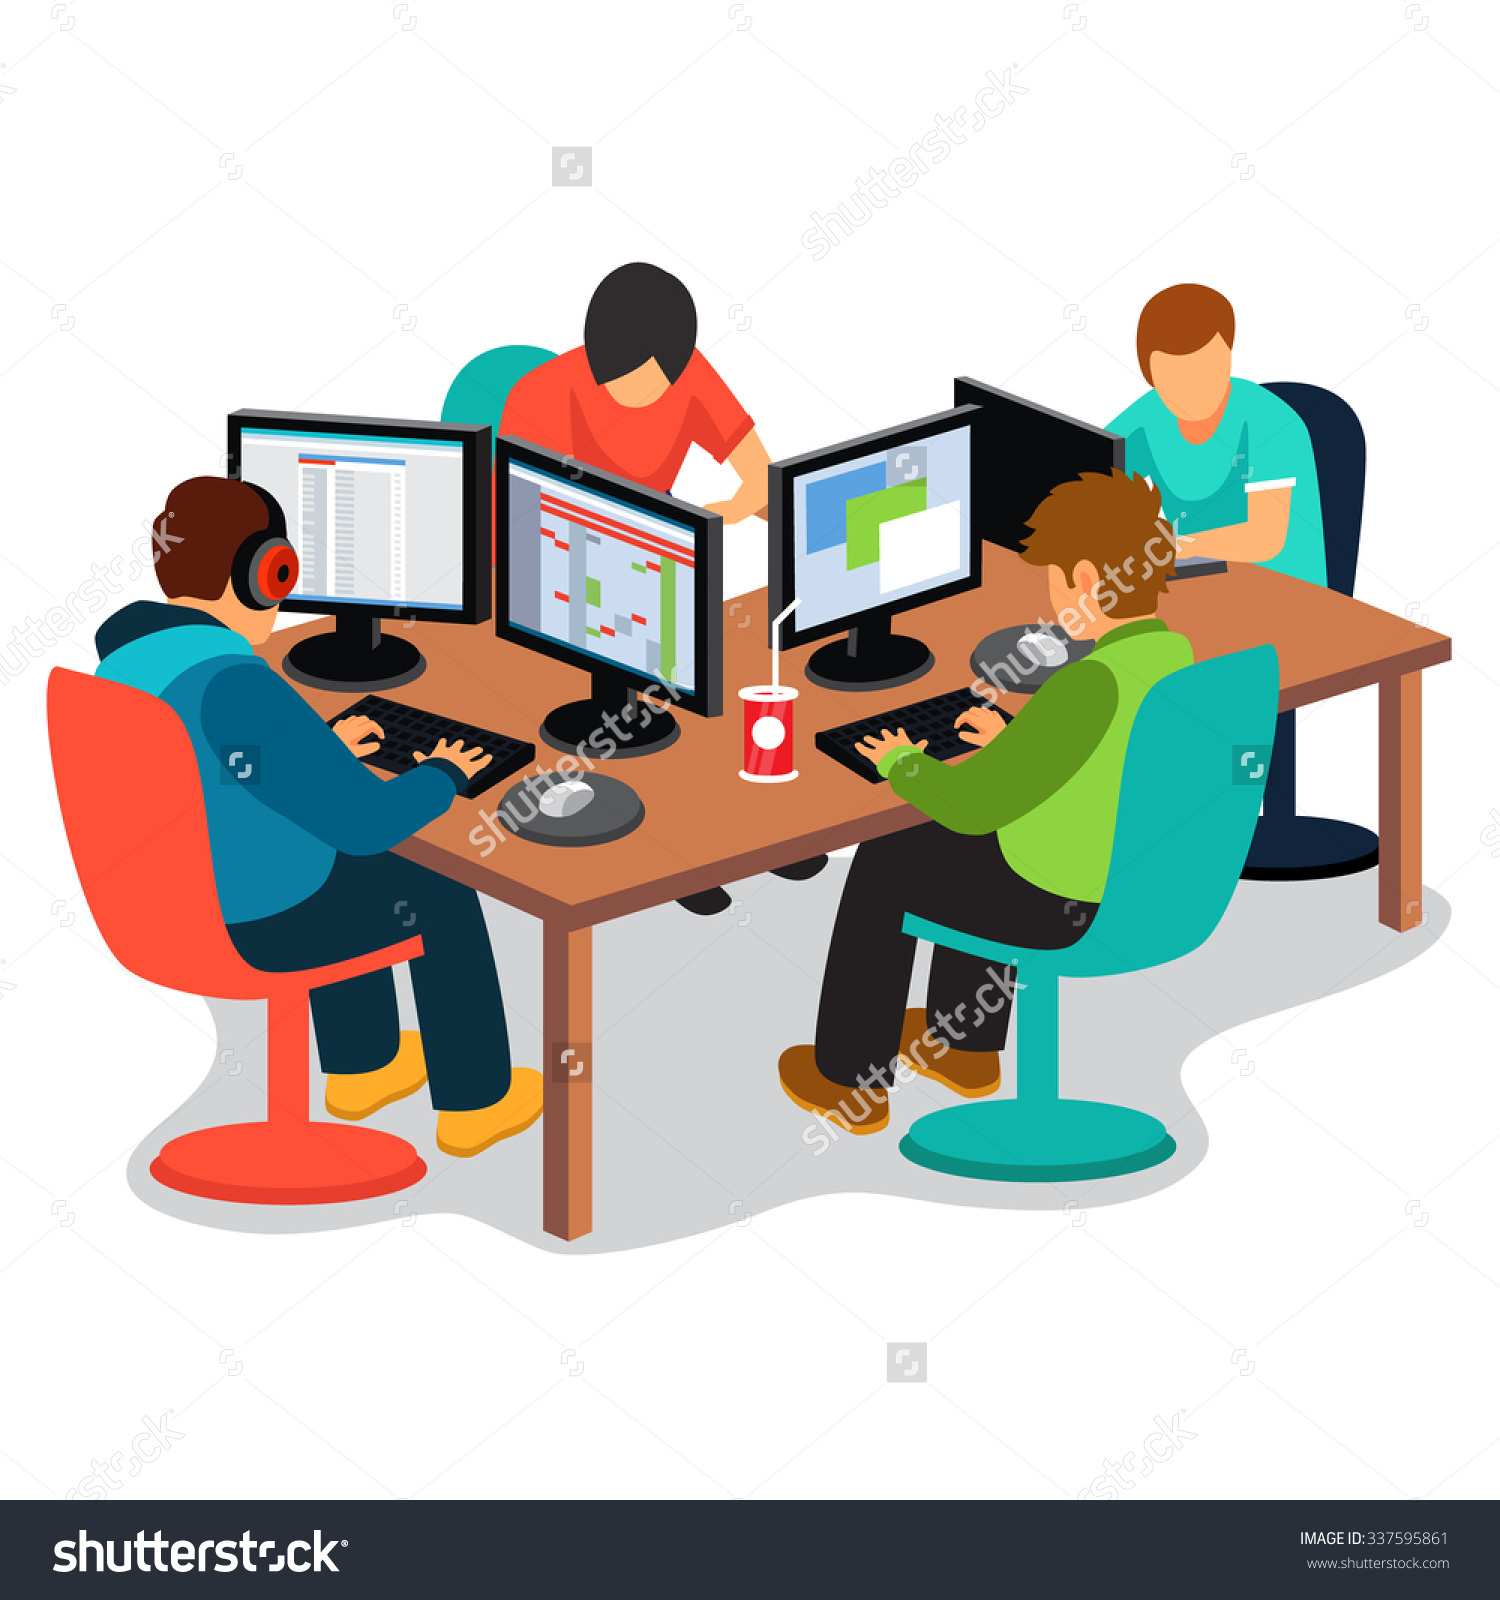 computer programmer clipart free - photo #18